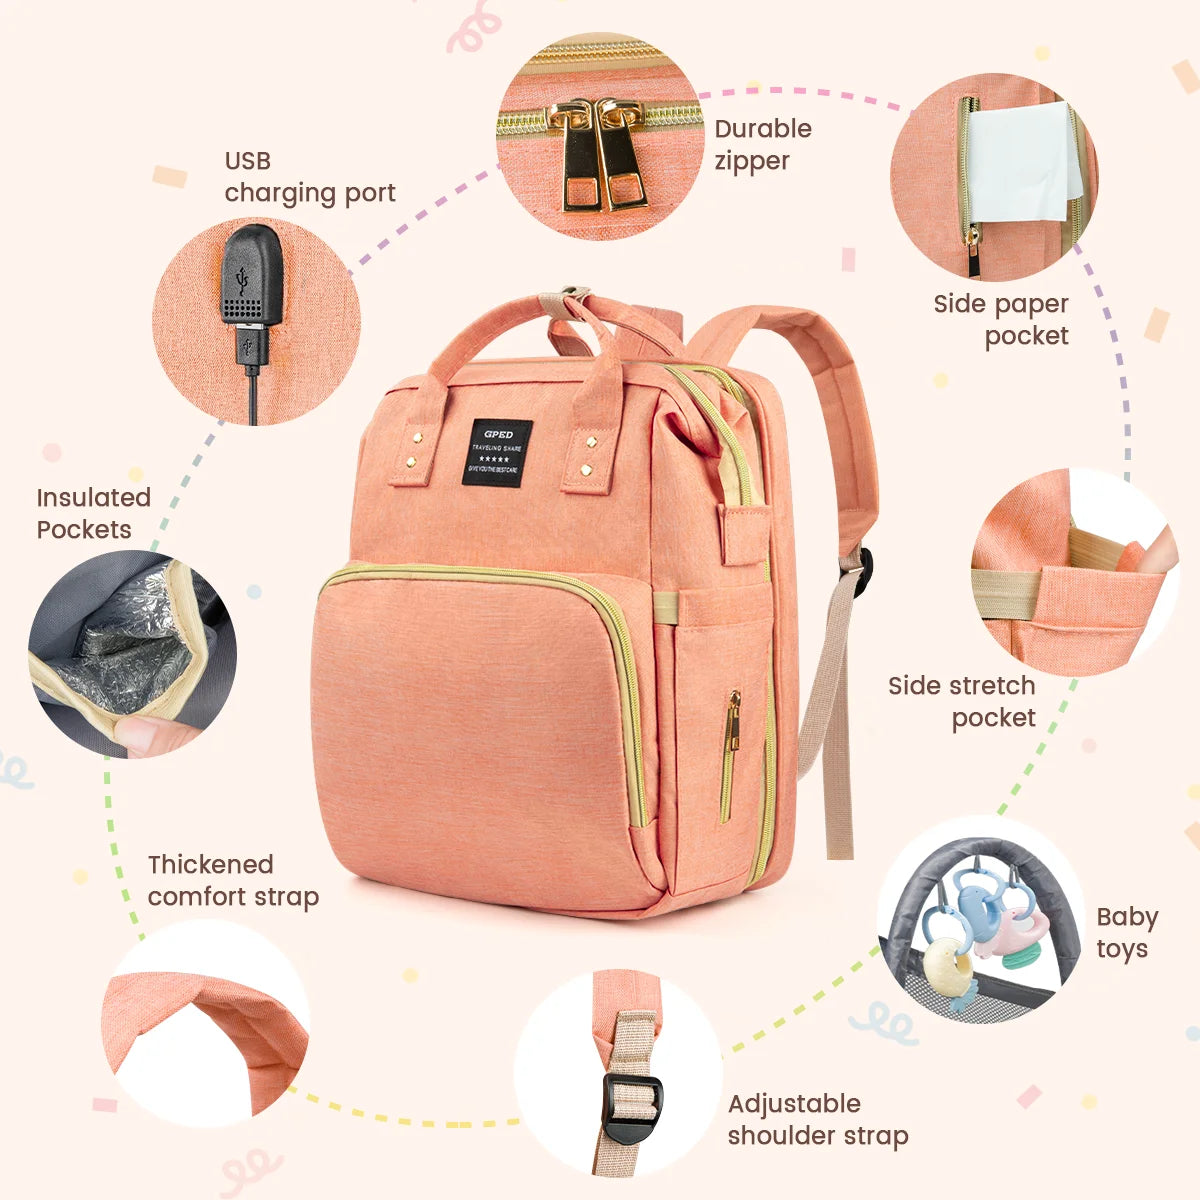 Diaper Bag Backpack, Multifunctional Baby Diaper Bags with Changing Station &Foldable Crib, Large Baby Bag for 0-6 Mouth Boys Girls W/ USB Charging Port&Stroller Strap, Mom Gifts Baby Essentials(Pink)